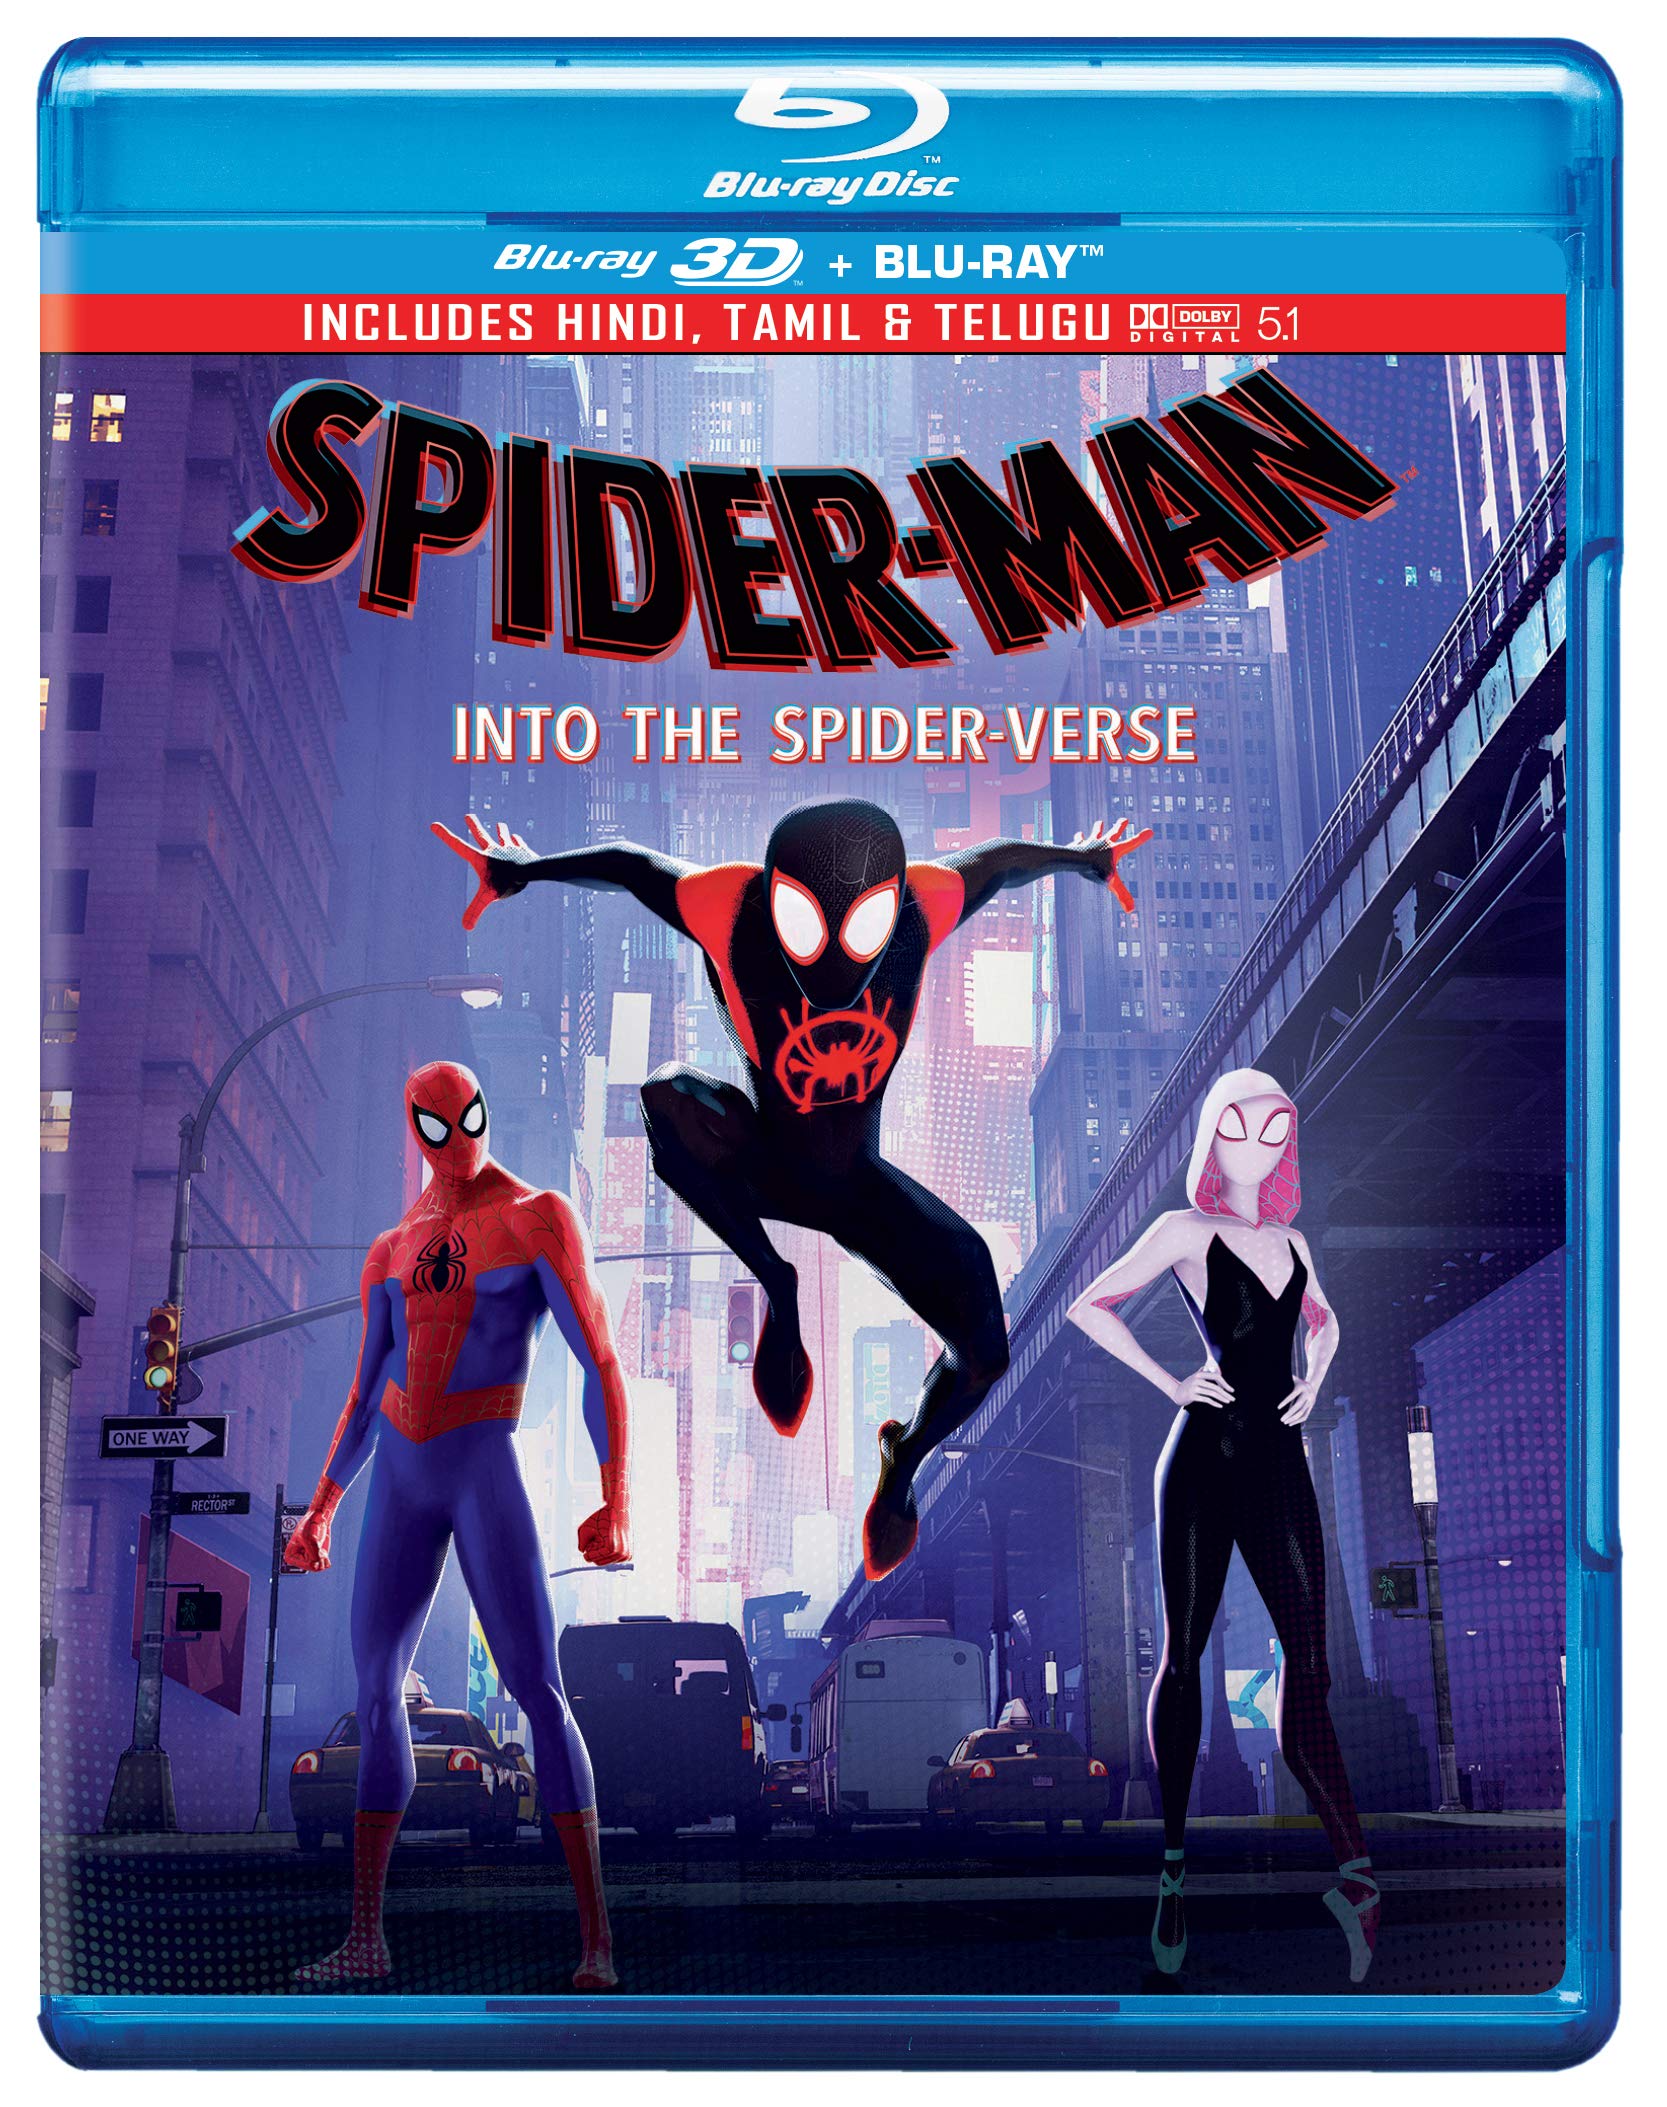 spider-man-into-the-spider-verse-blu-ray-3d-blu-ray-2-disc-movi